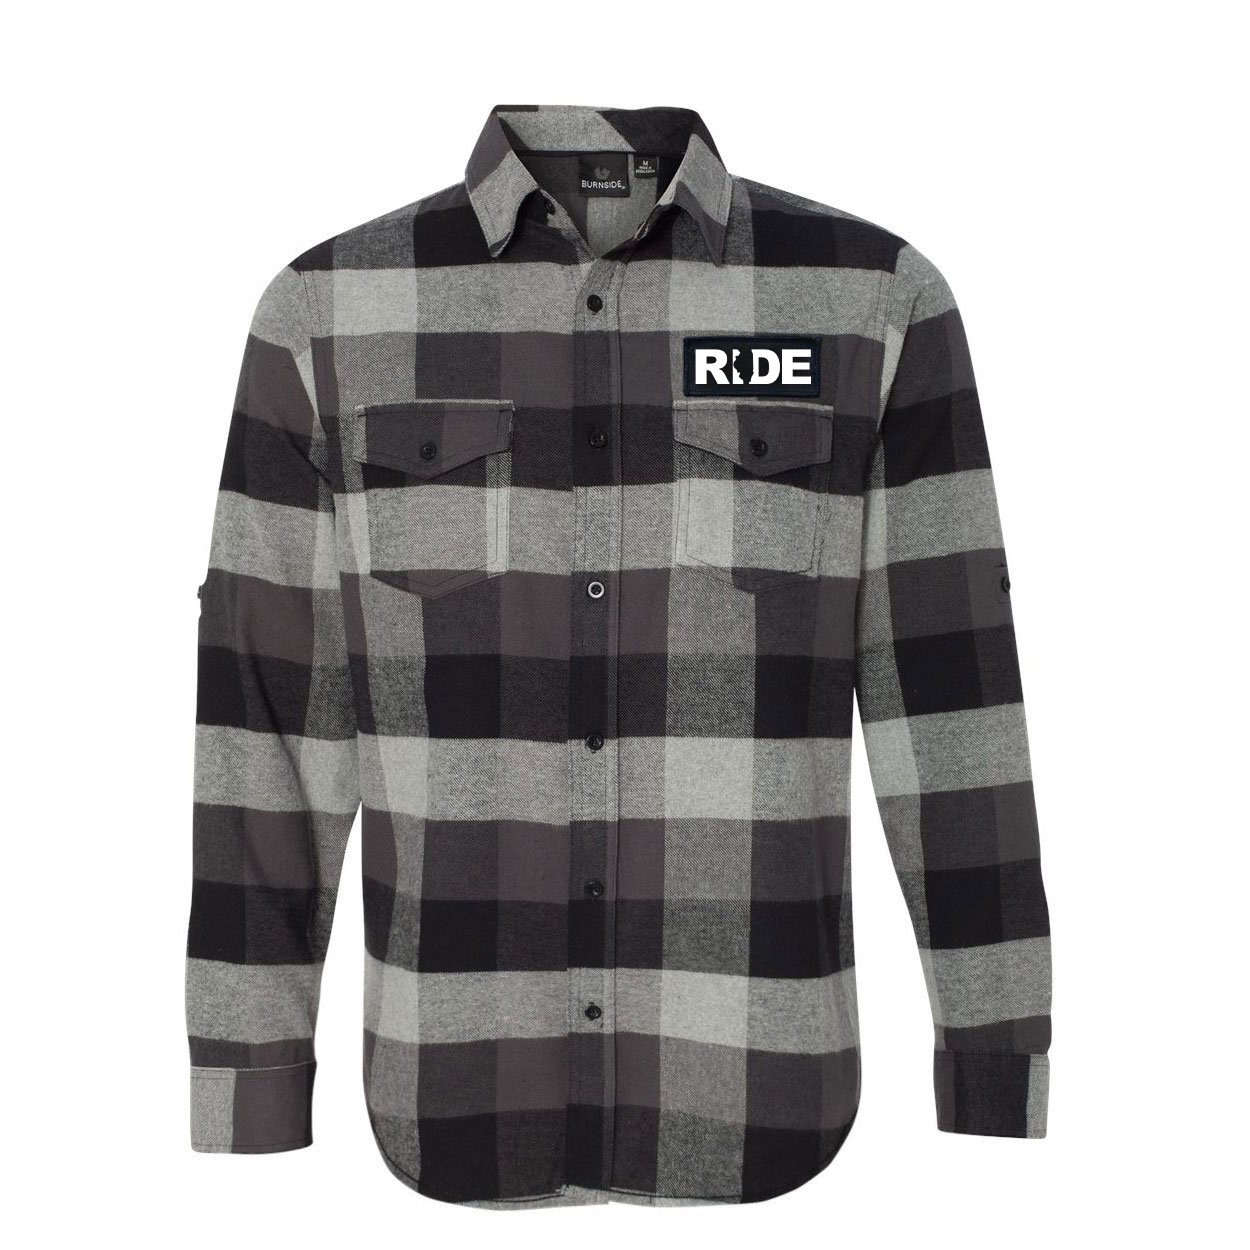 Ride Illinois Classic Unisex Long Sleeve Woven Patch Flannel Shirt Black/Gray (White Logo)